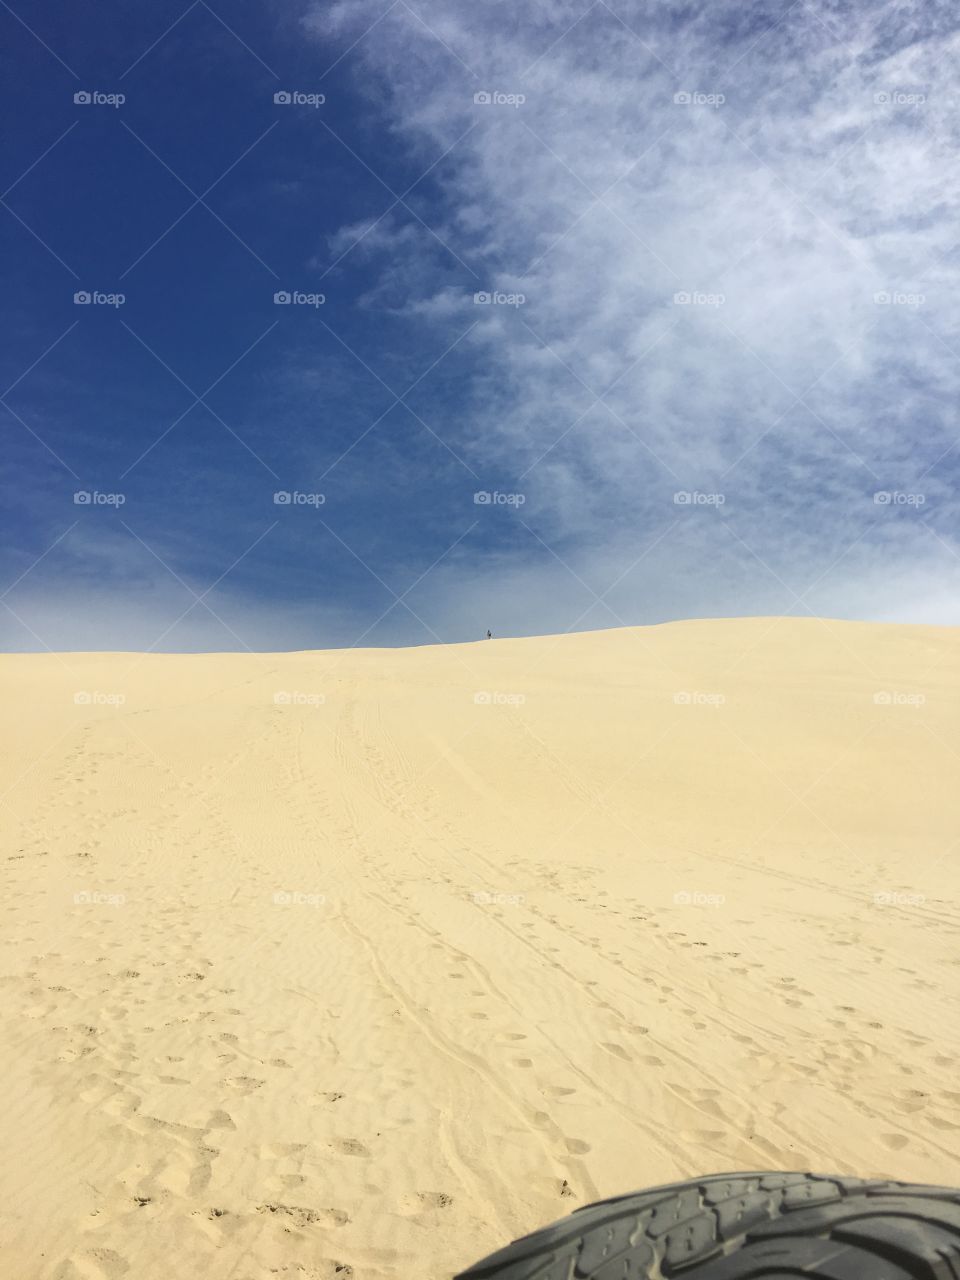 The sands of time 